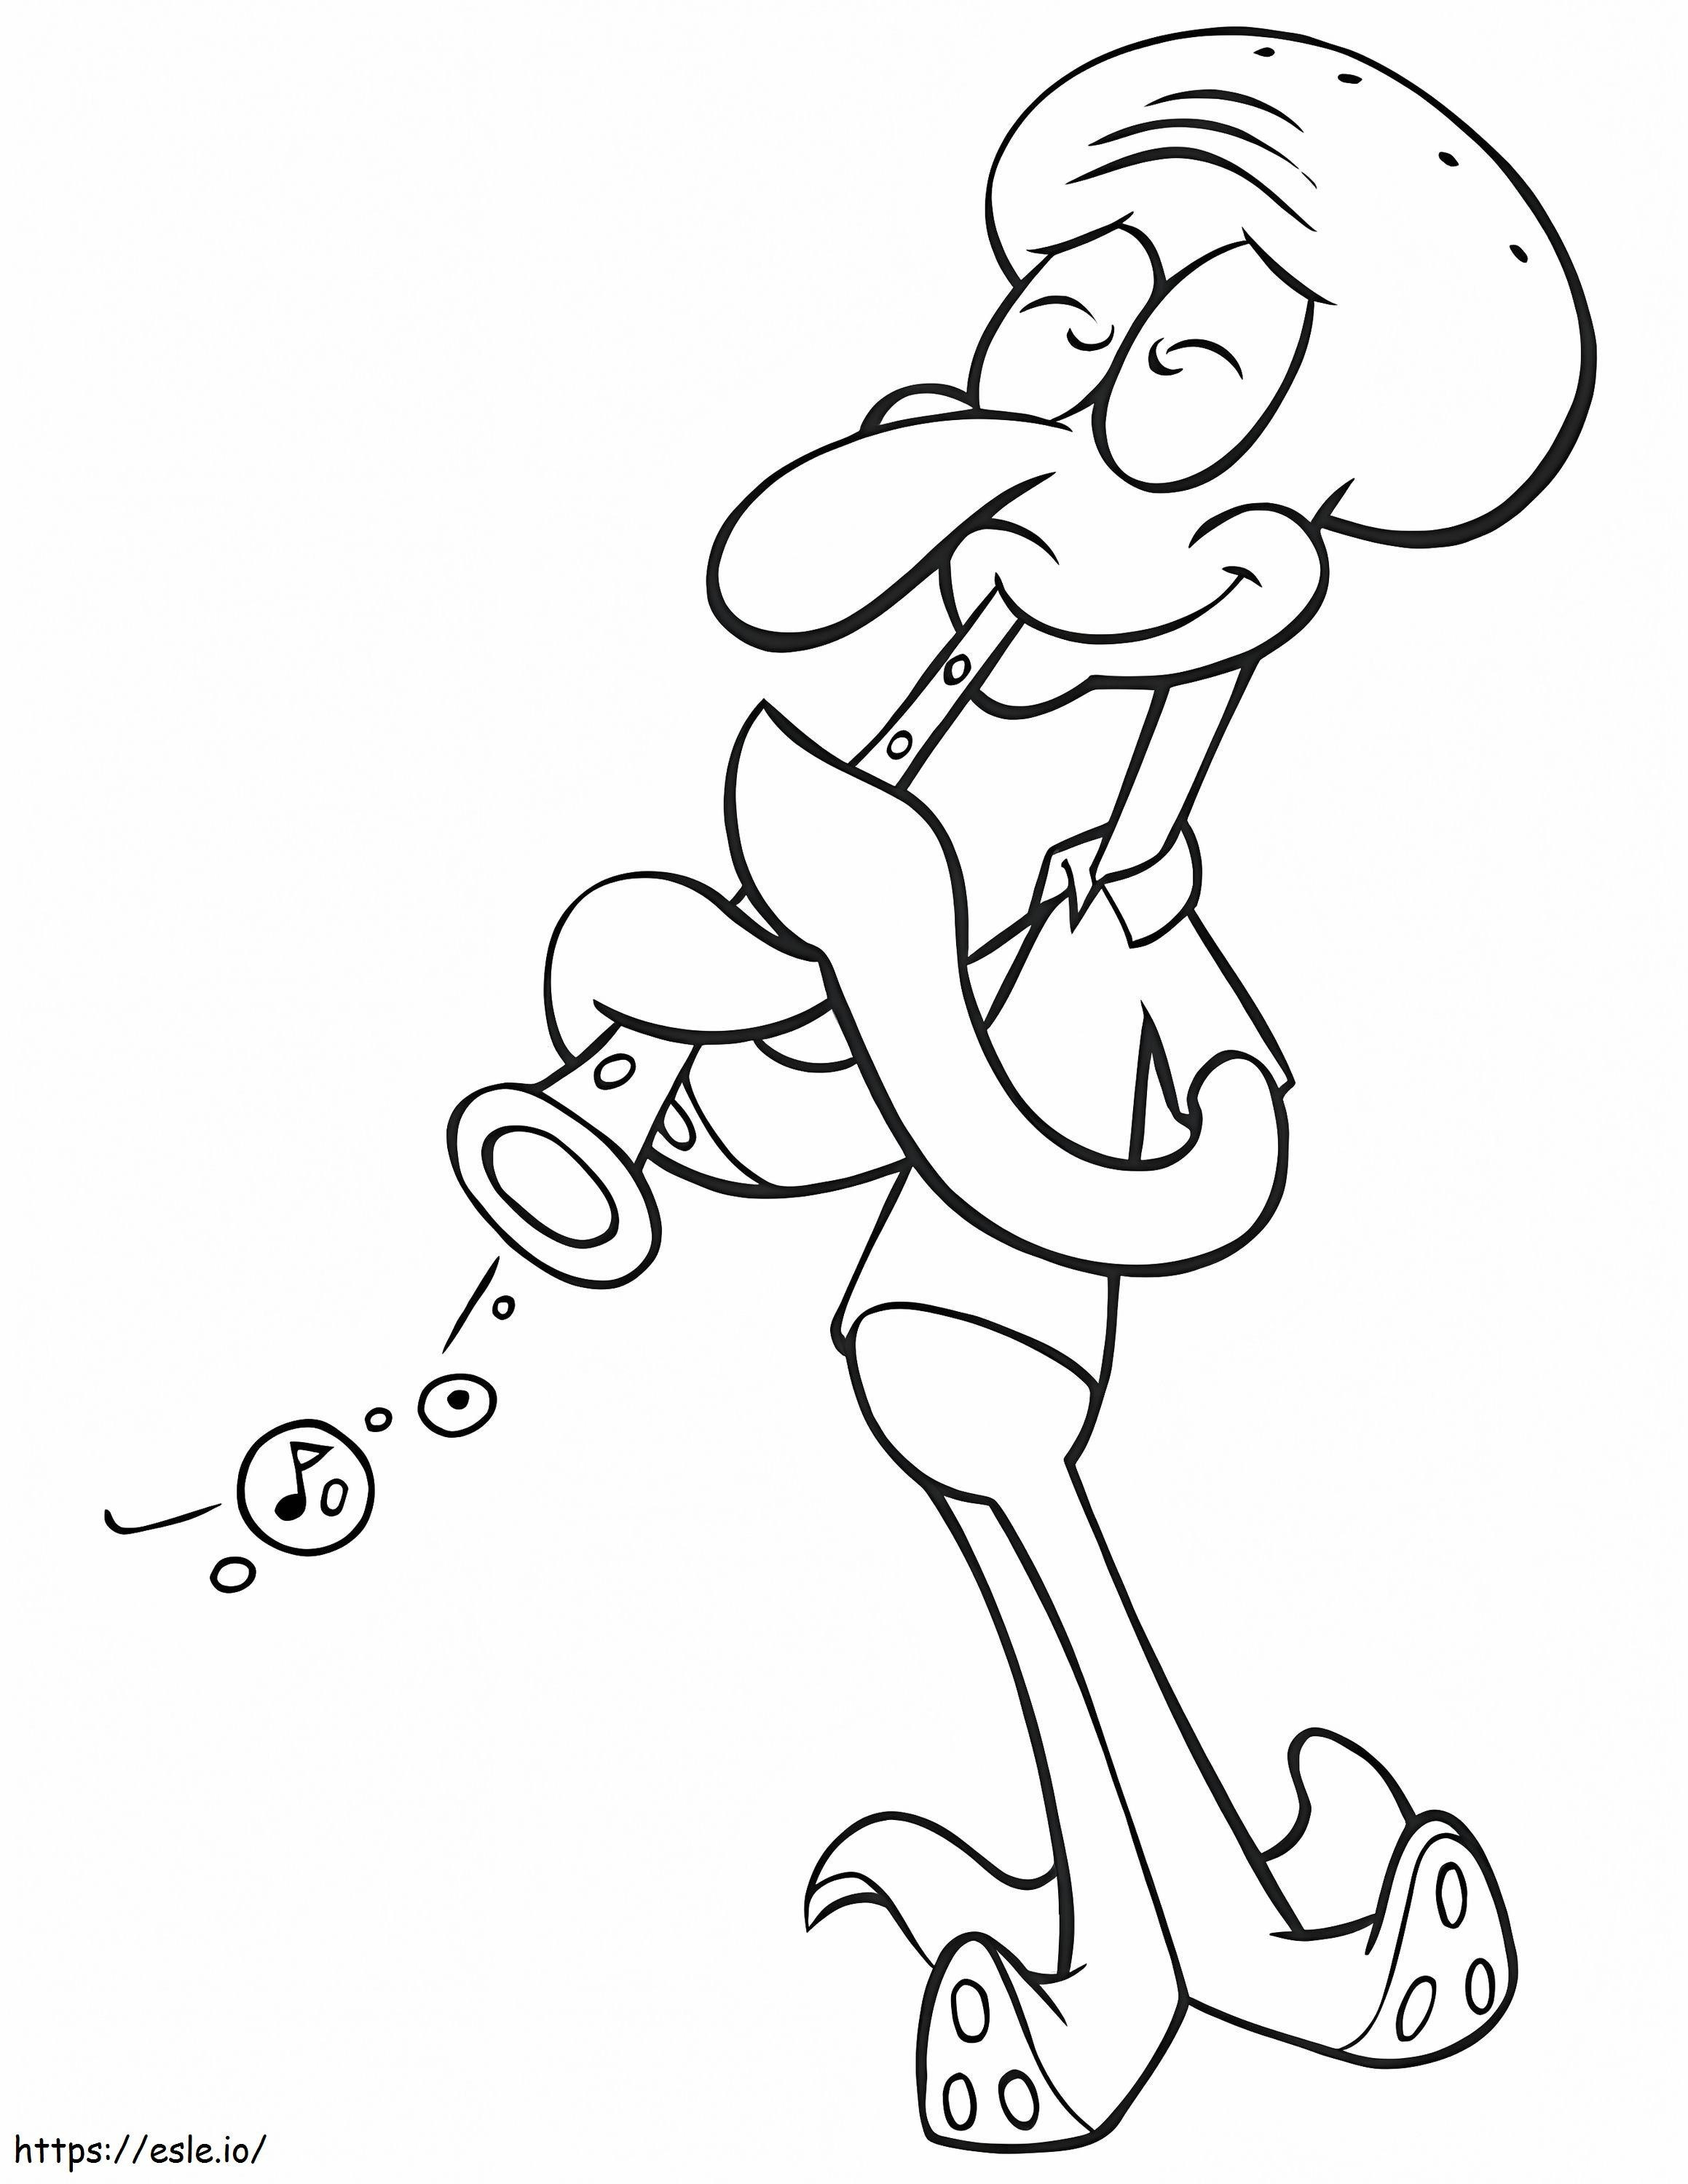 Happy Squidward Tentacles coloring page